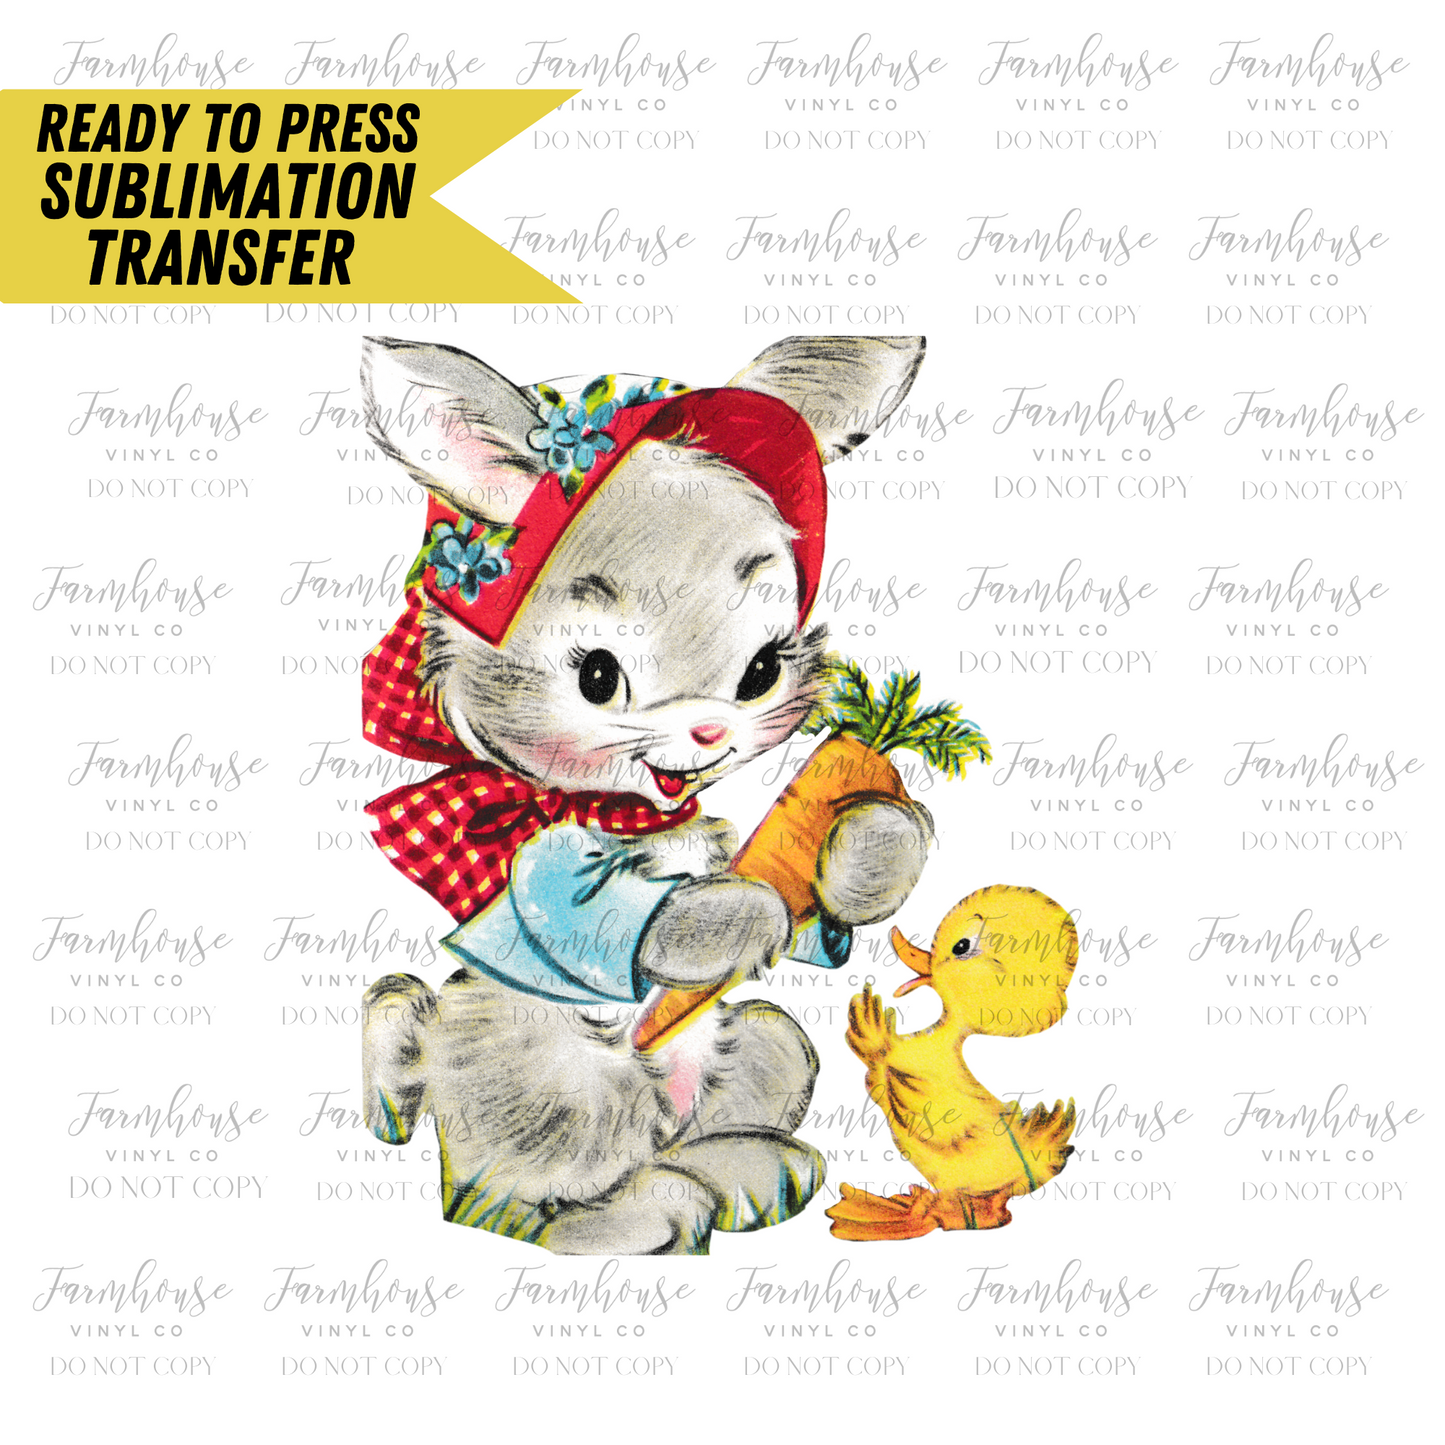 Vintage Easter Ready To Press Sublimation Transfer